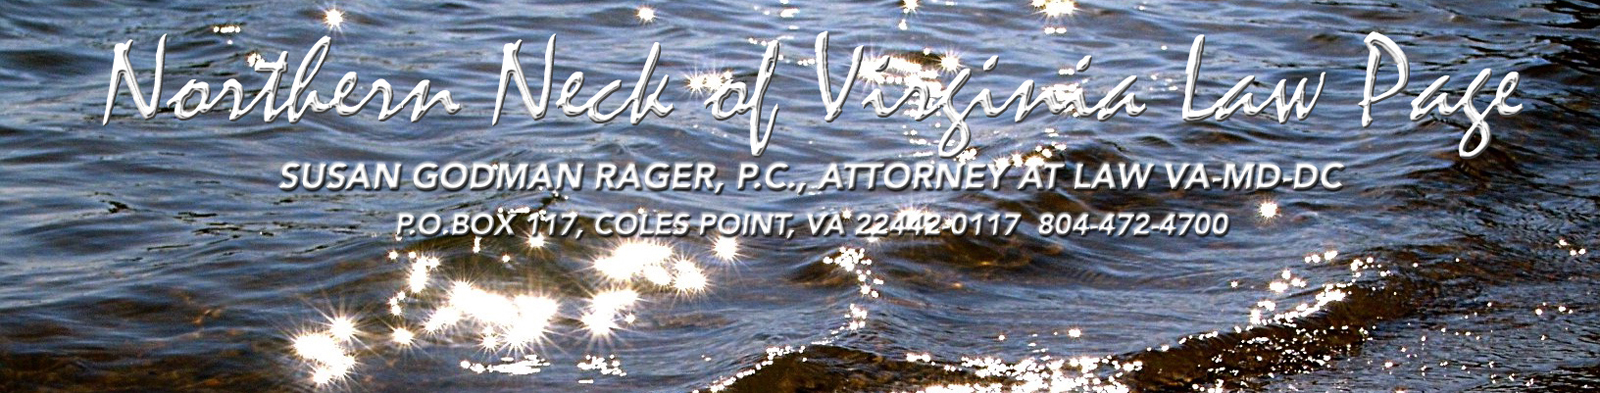 Northern Neck of Virginia Law Page - Susan Godman Rager, P.C., Attorney at Law